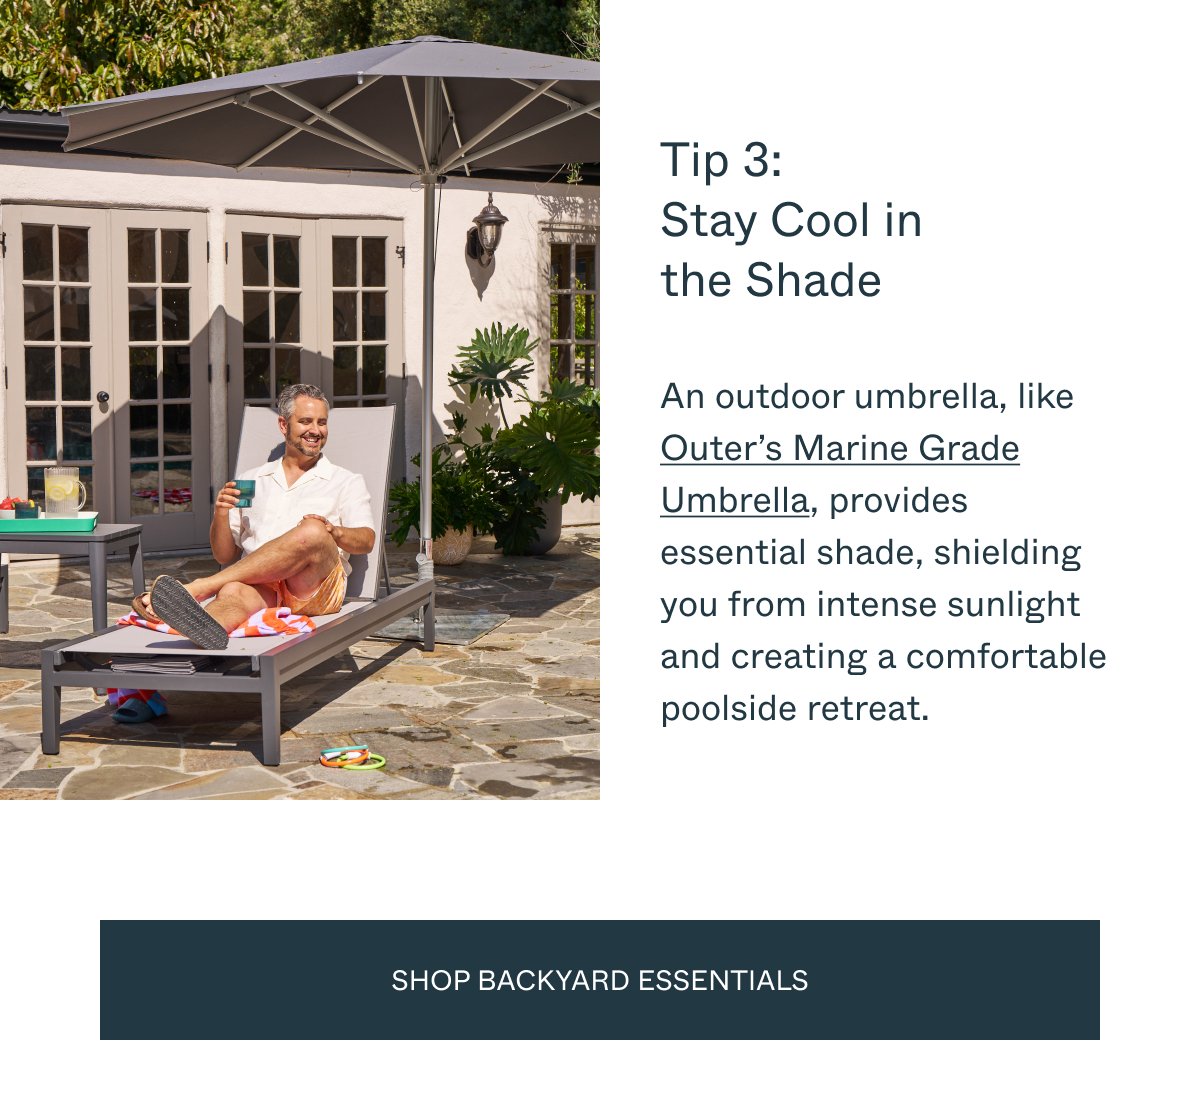 Tip 3: Stay Cool in  the Shade  An outdoor umbrella, like Outer’s Marine Grade Umbrella, provides essential shade, shielding you from intense sunlight and creating a comfortable poolside retreat. shop backyard essentials